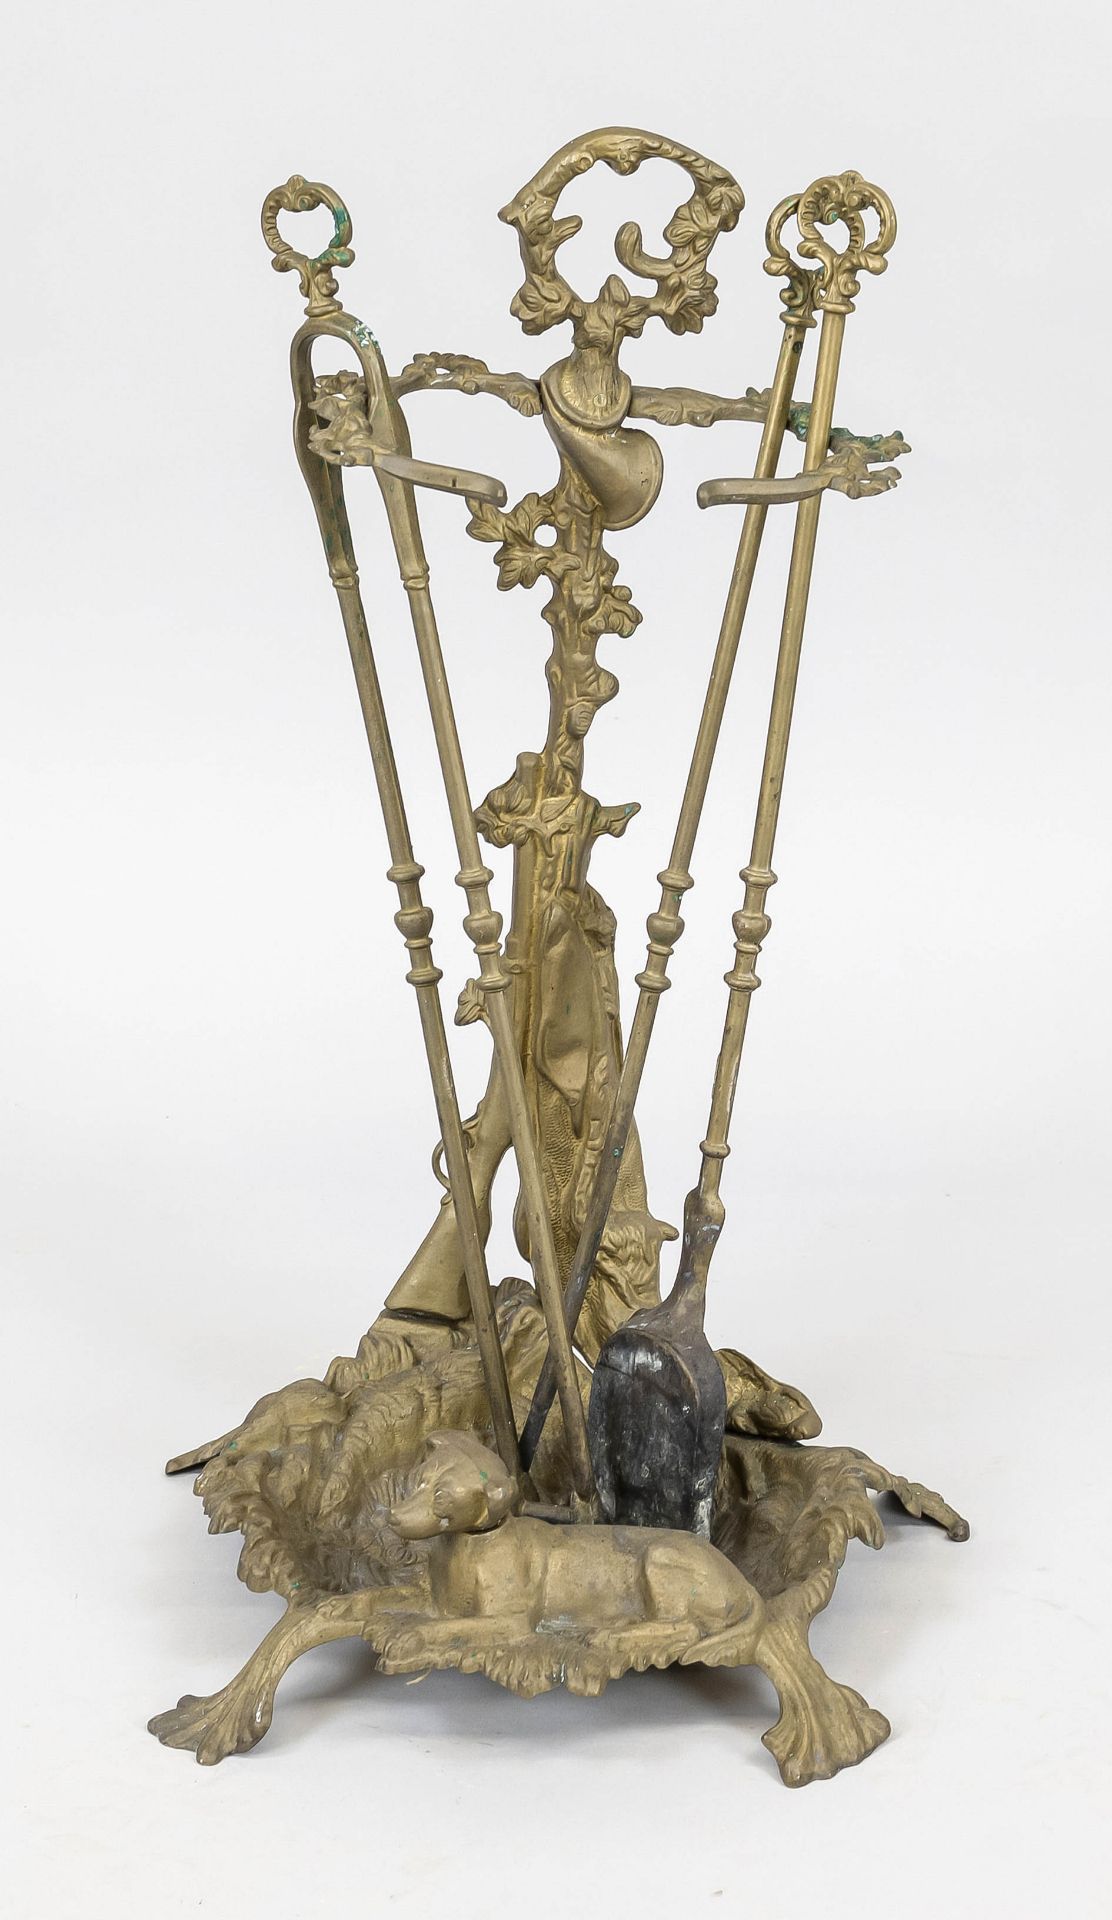 Fireplace set with stand, 19th/20th century, brass. Hunting motif, cutlery consisting of tongs,